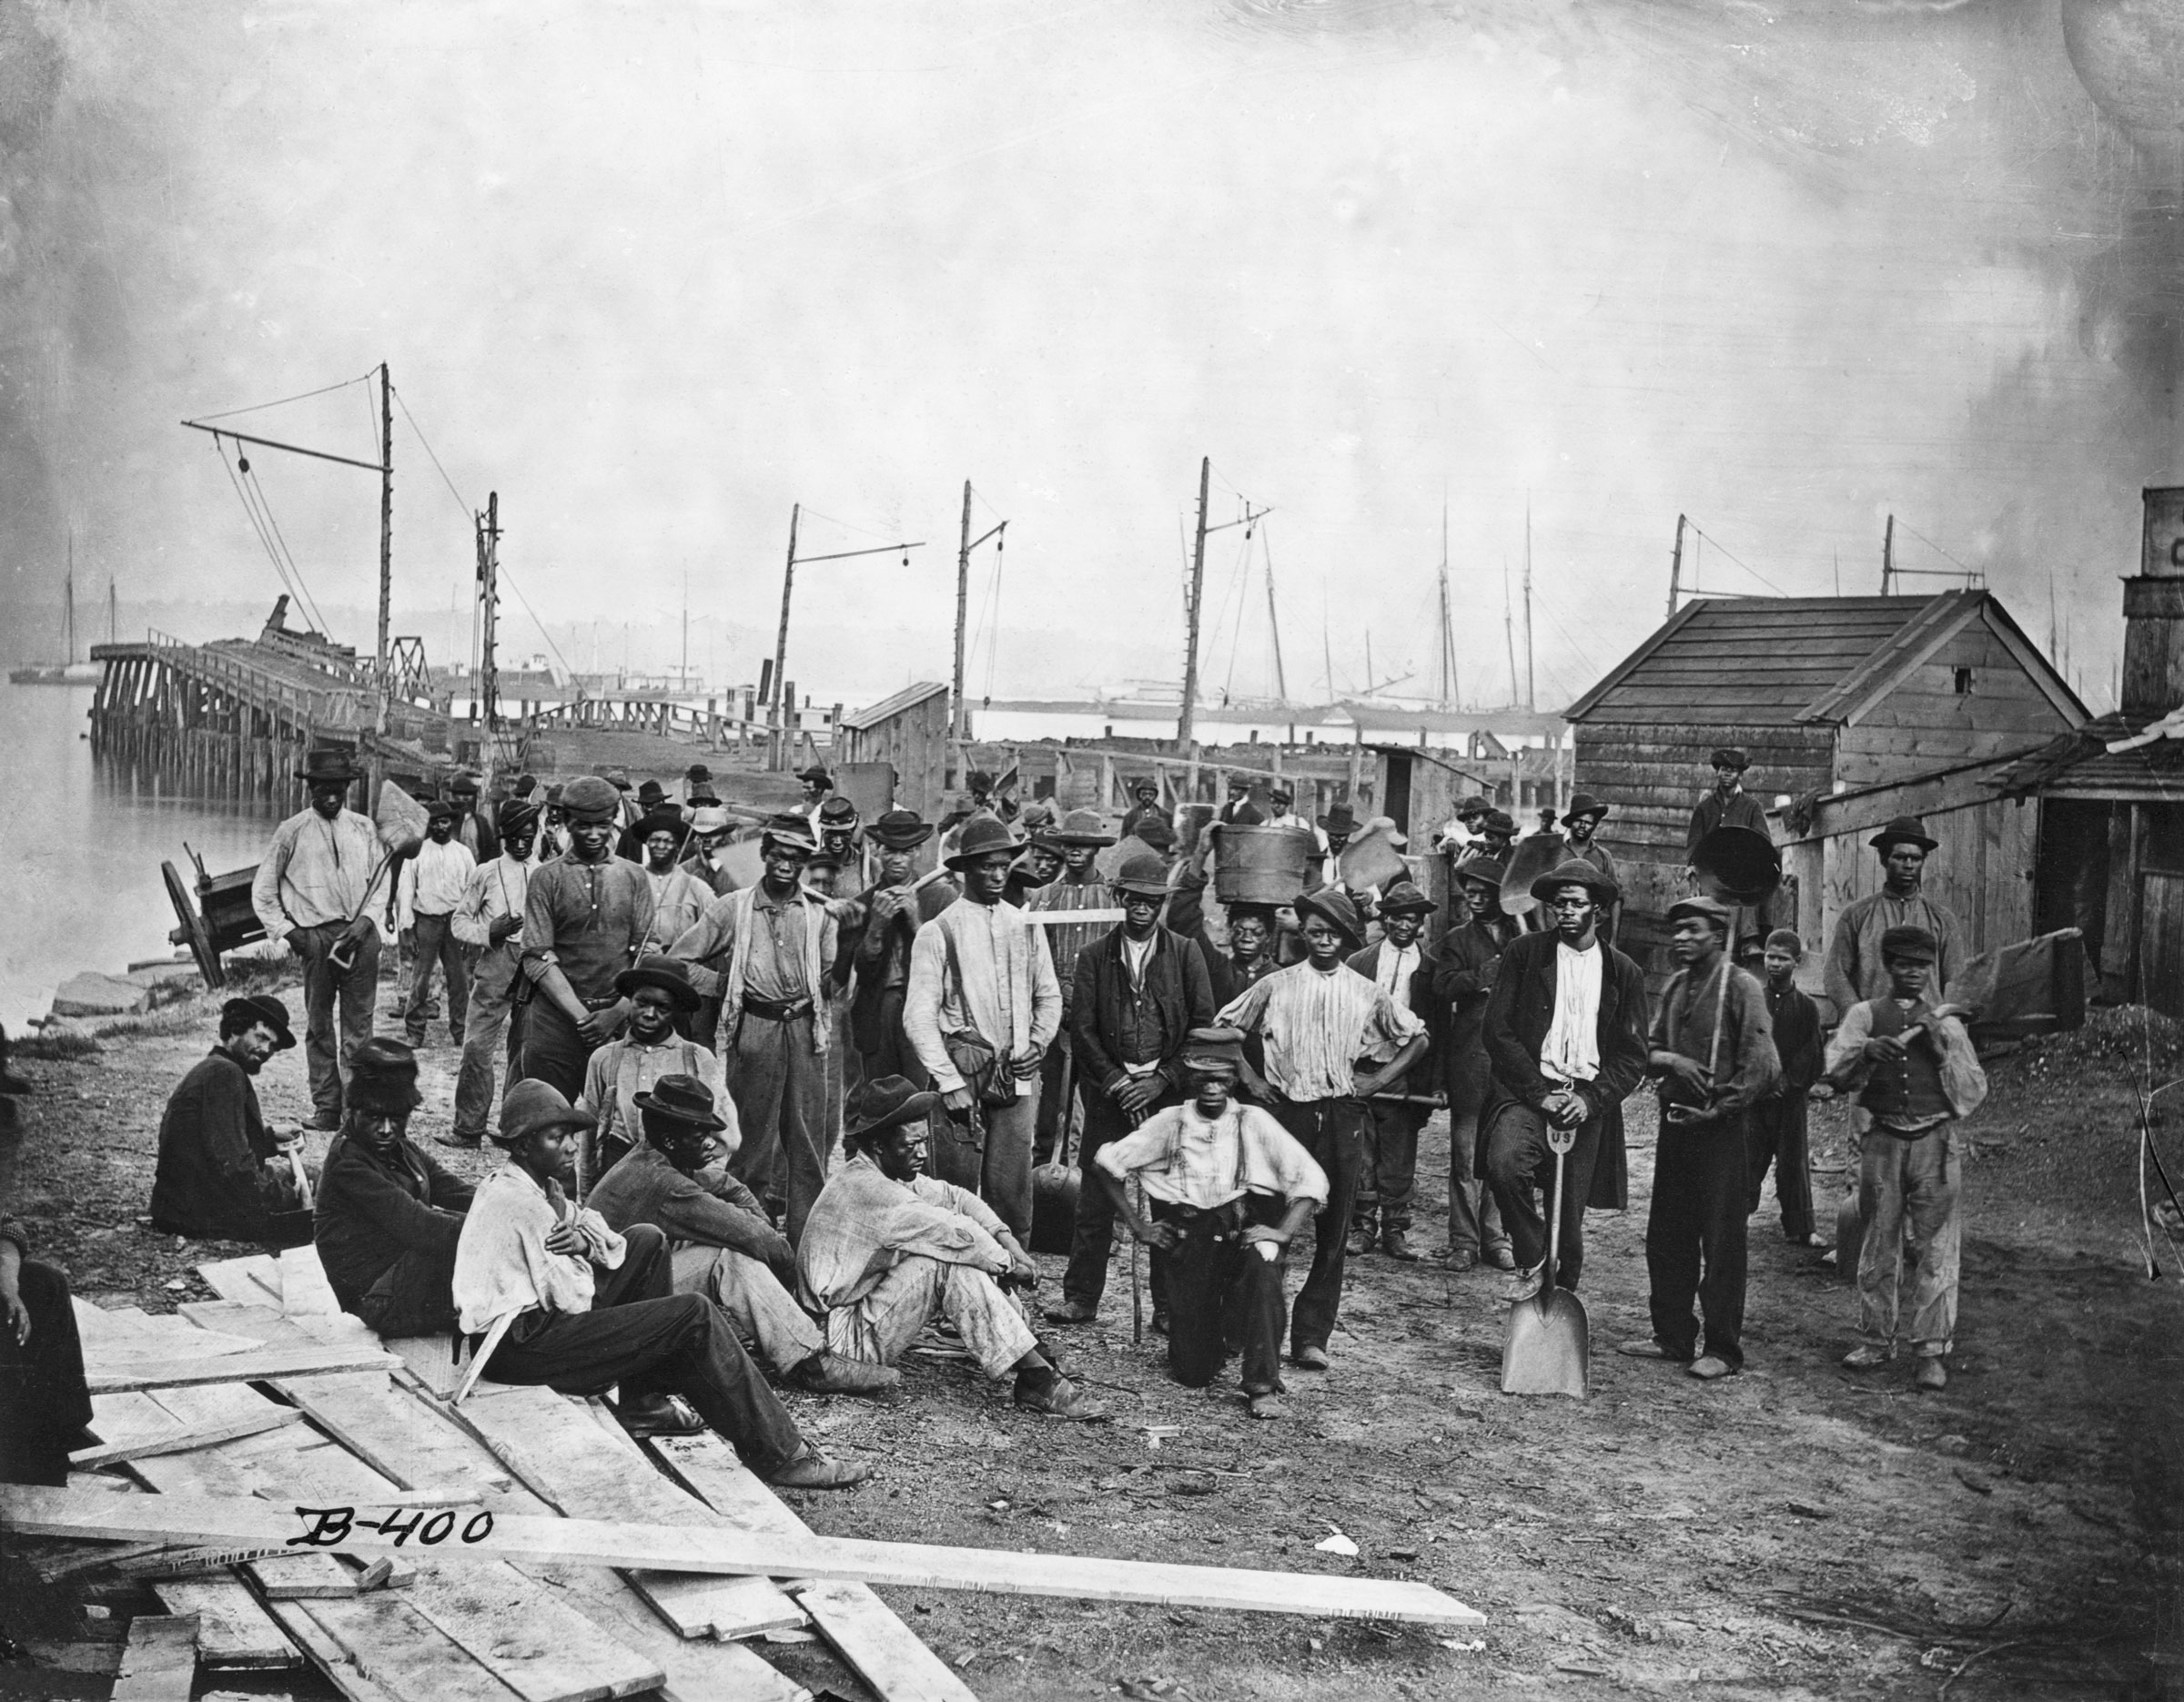 A group of freed African American slaves along a wharf during the United States Civil War.